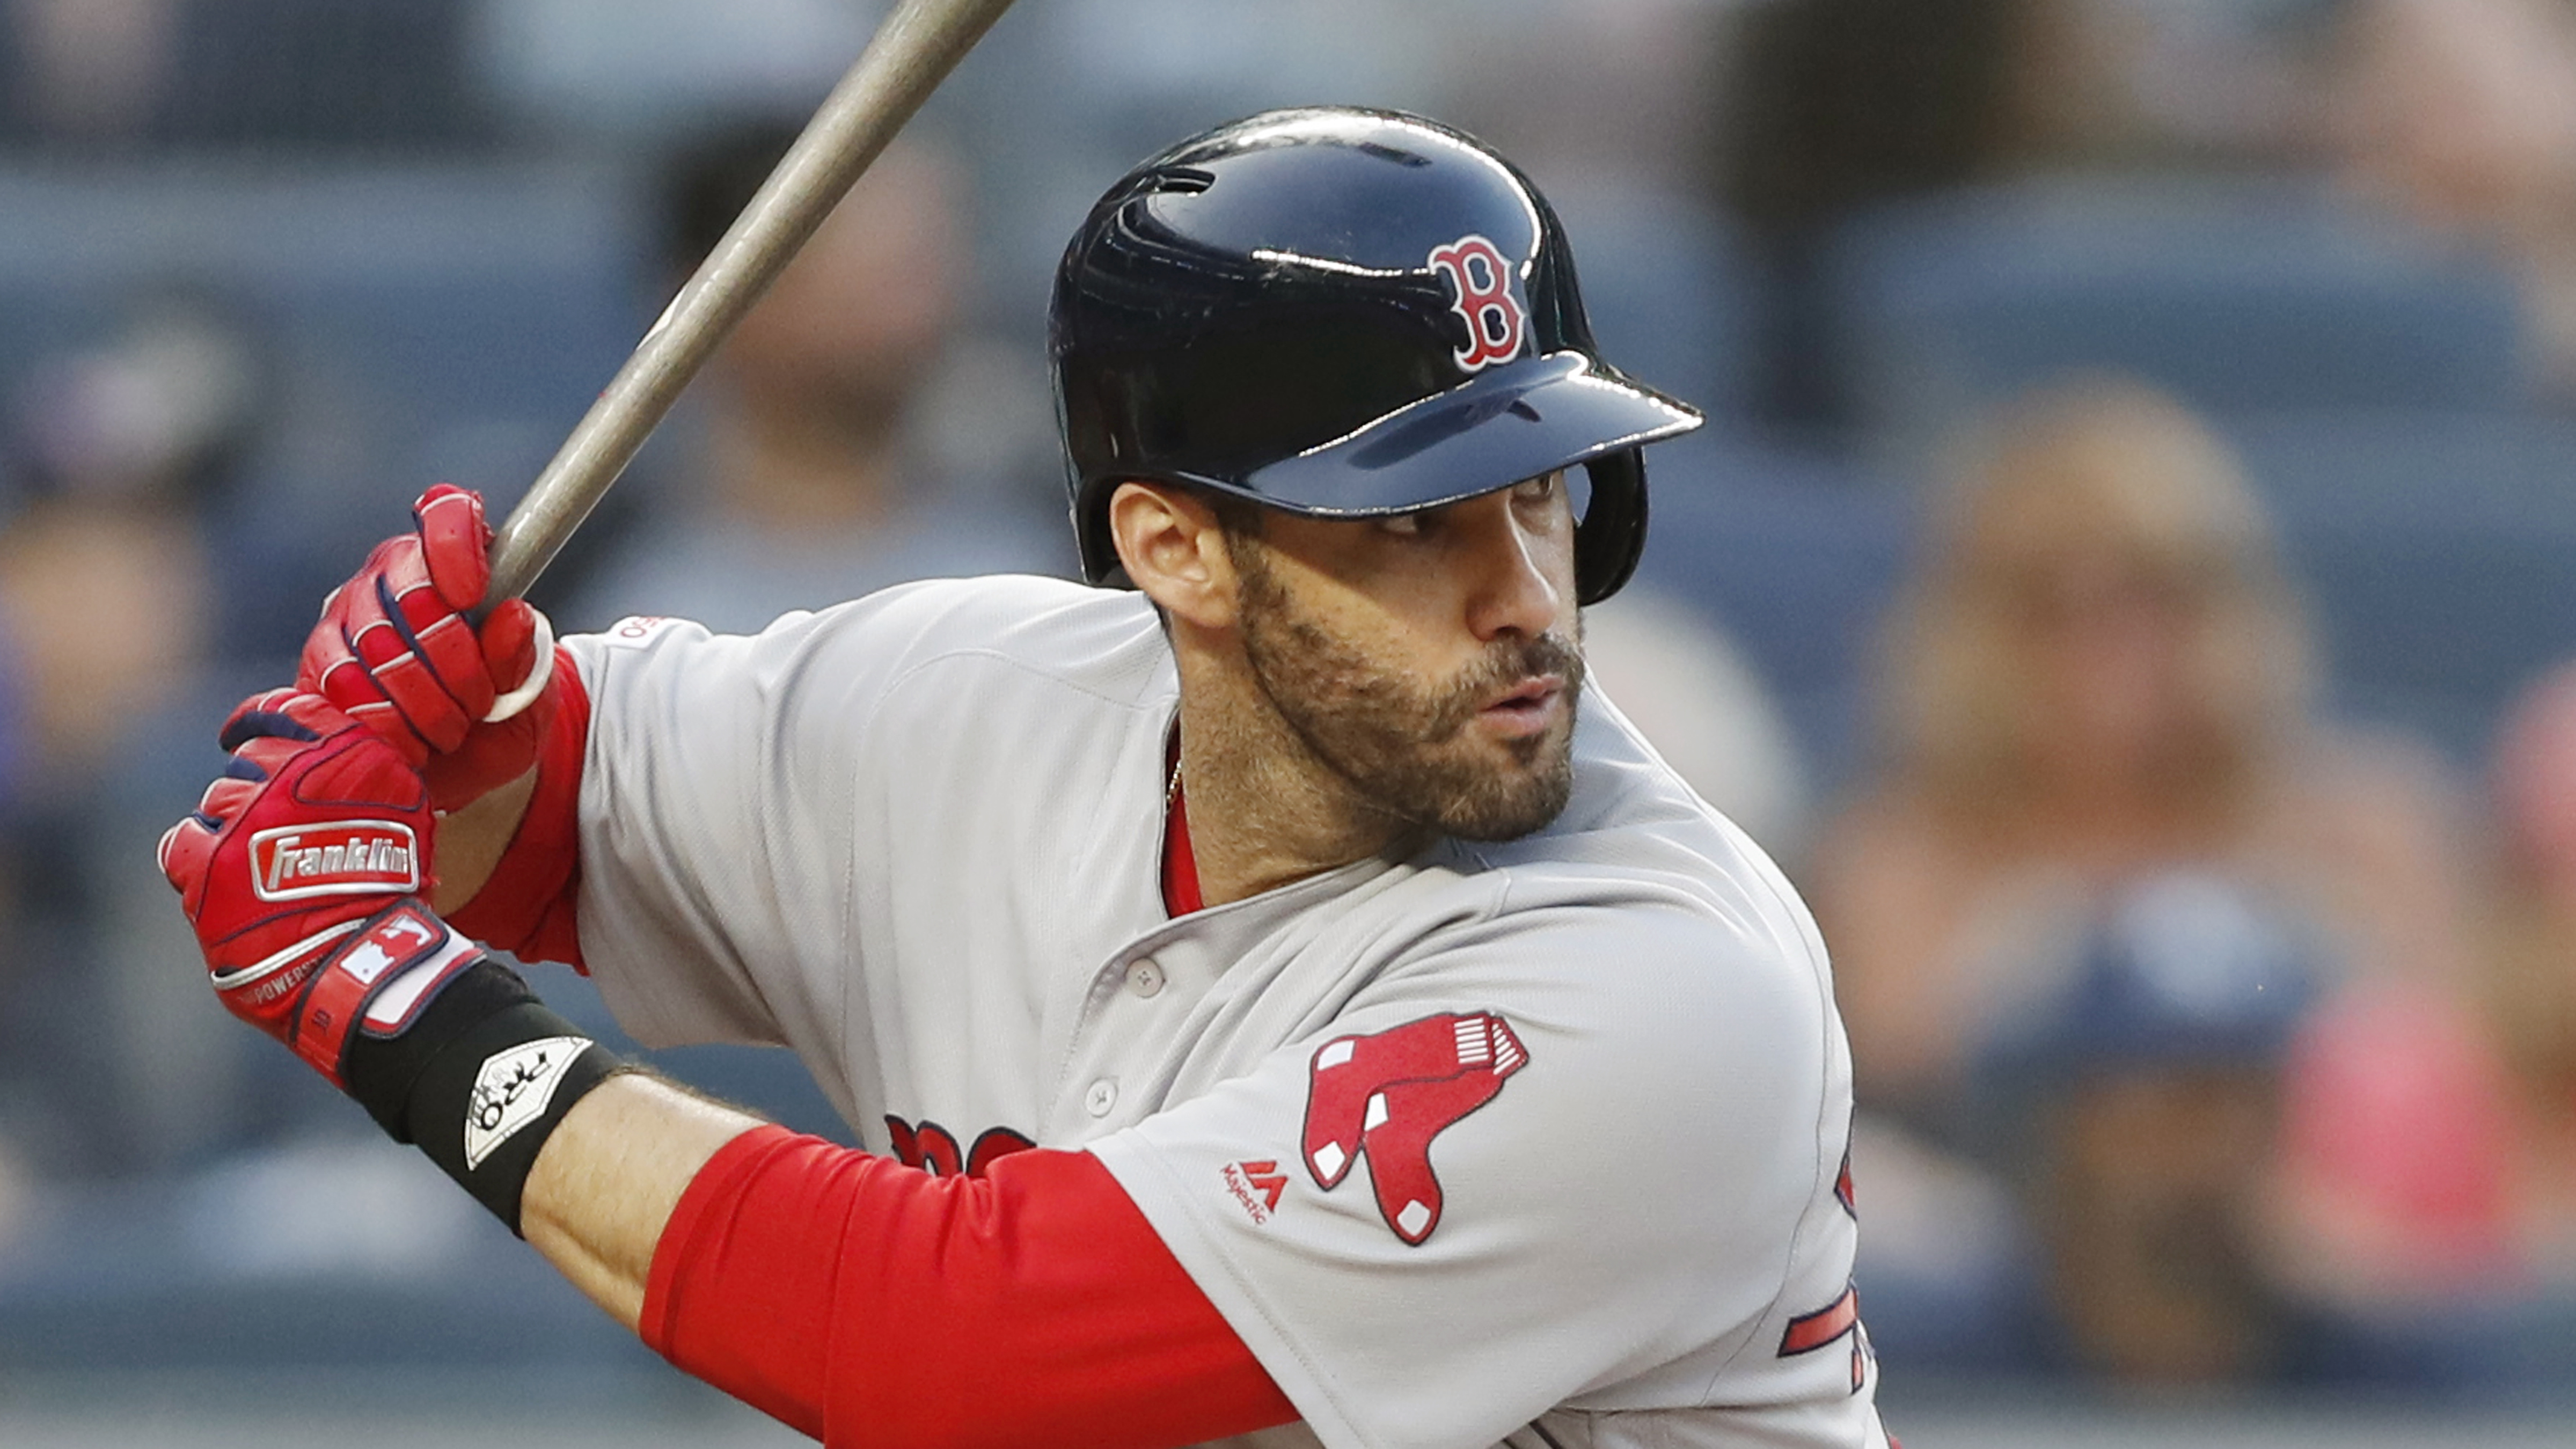 J.D. Martinez: 'I haven't been very good' in 2020, but he's hip to